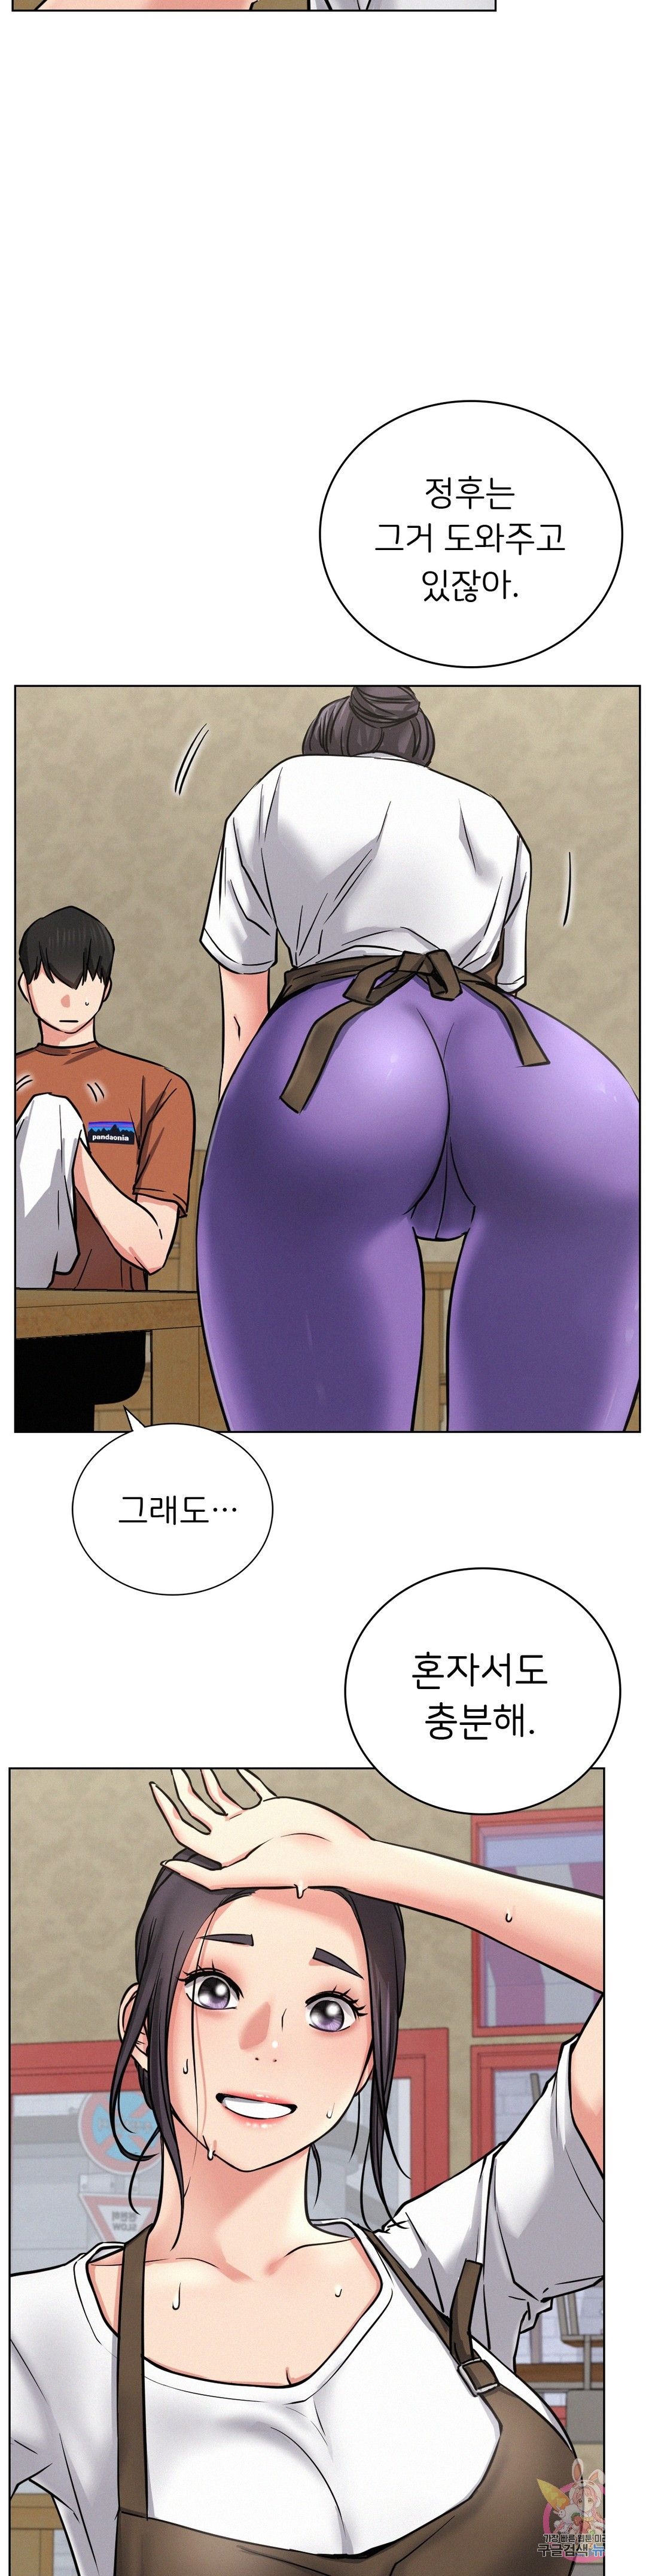 Living With a Broke Ass Woman Raw - Chapter 24 Page 34